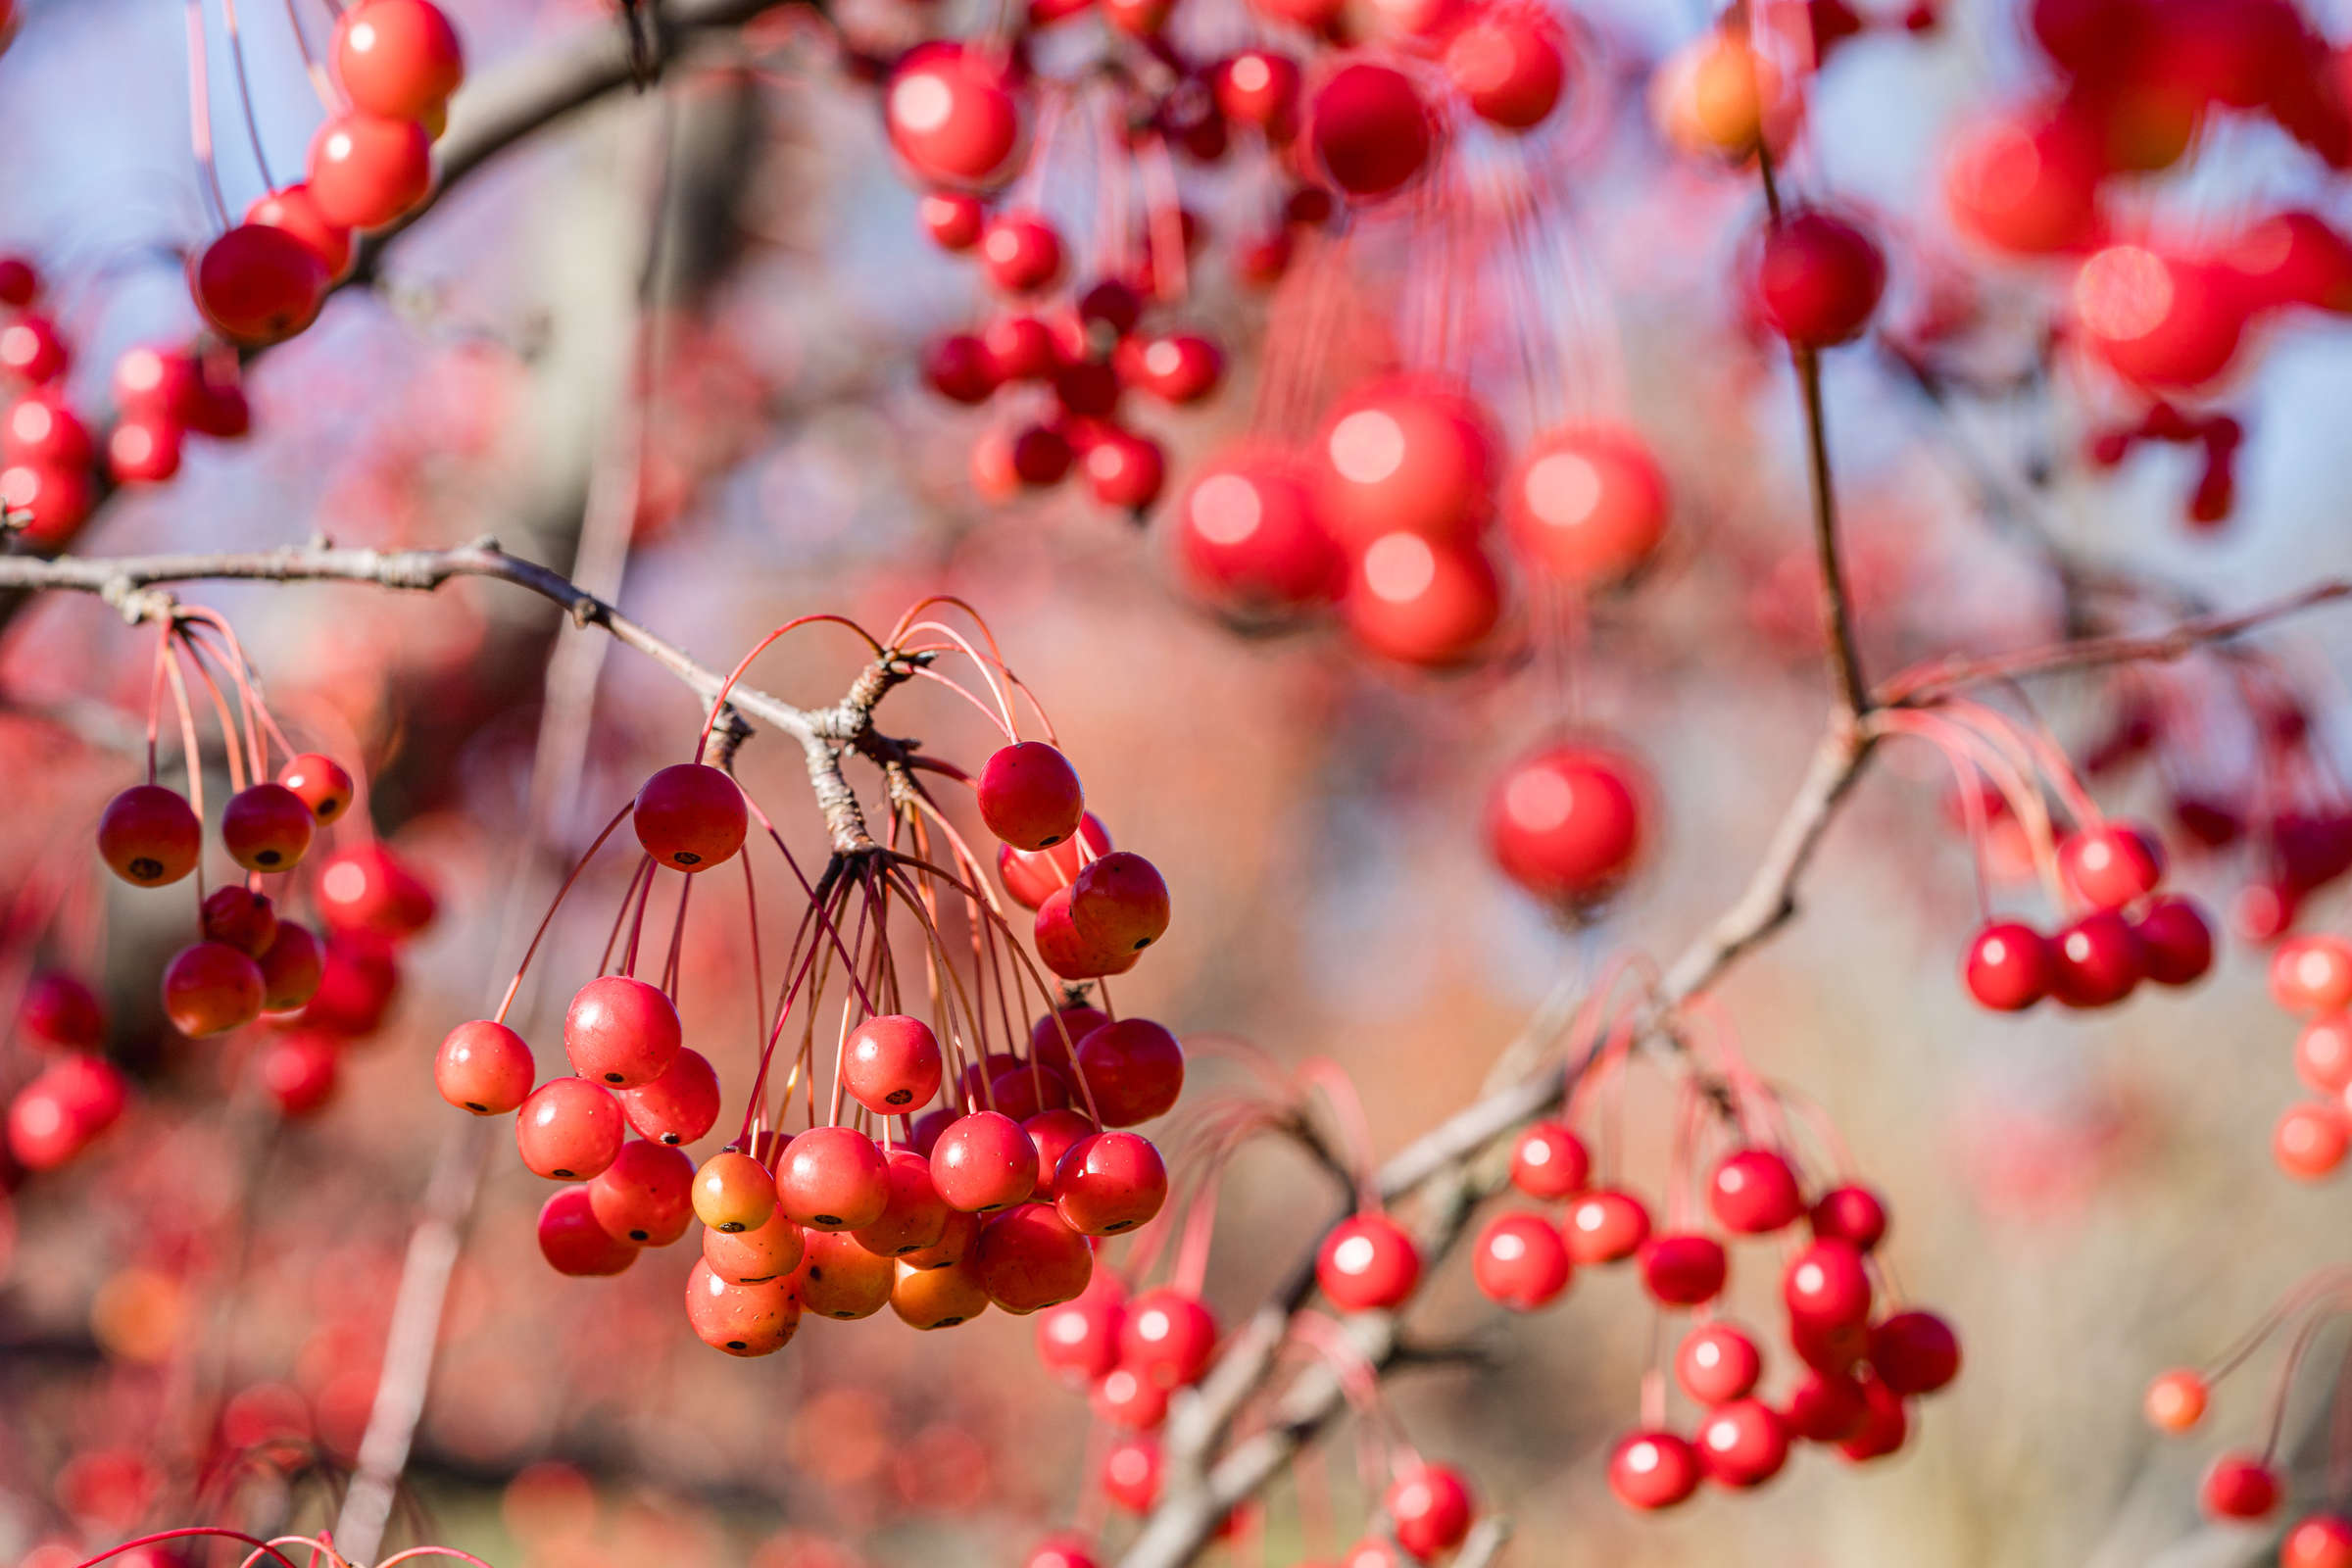 Vivid red berries form a cloud of color on otherwise bare, brown branches